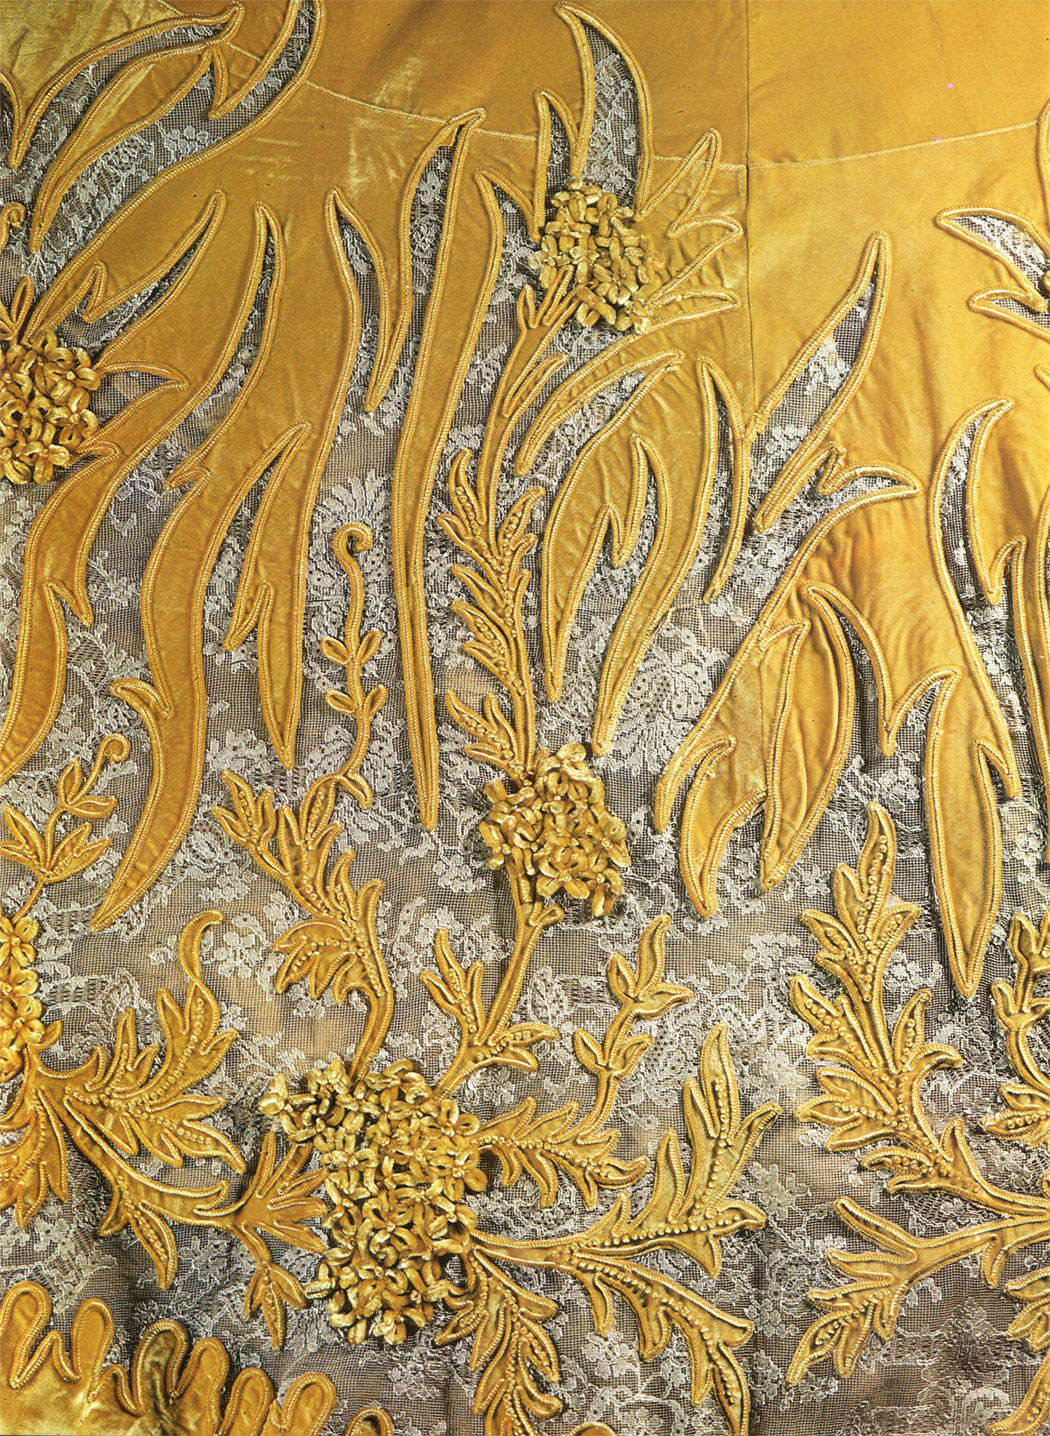 Detail of the dress